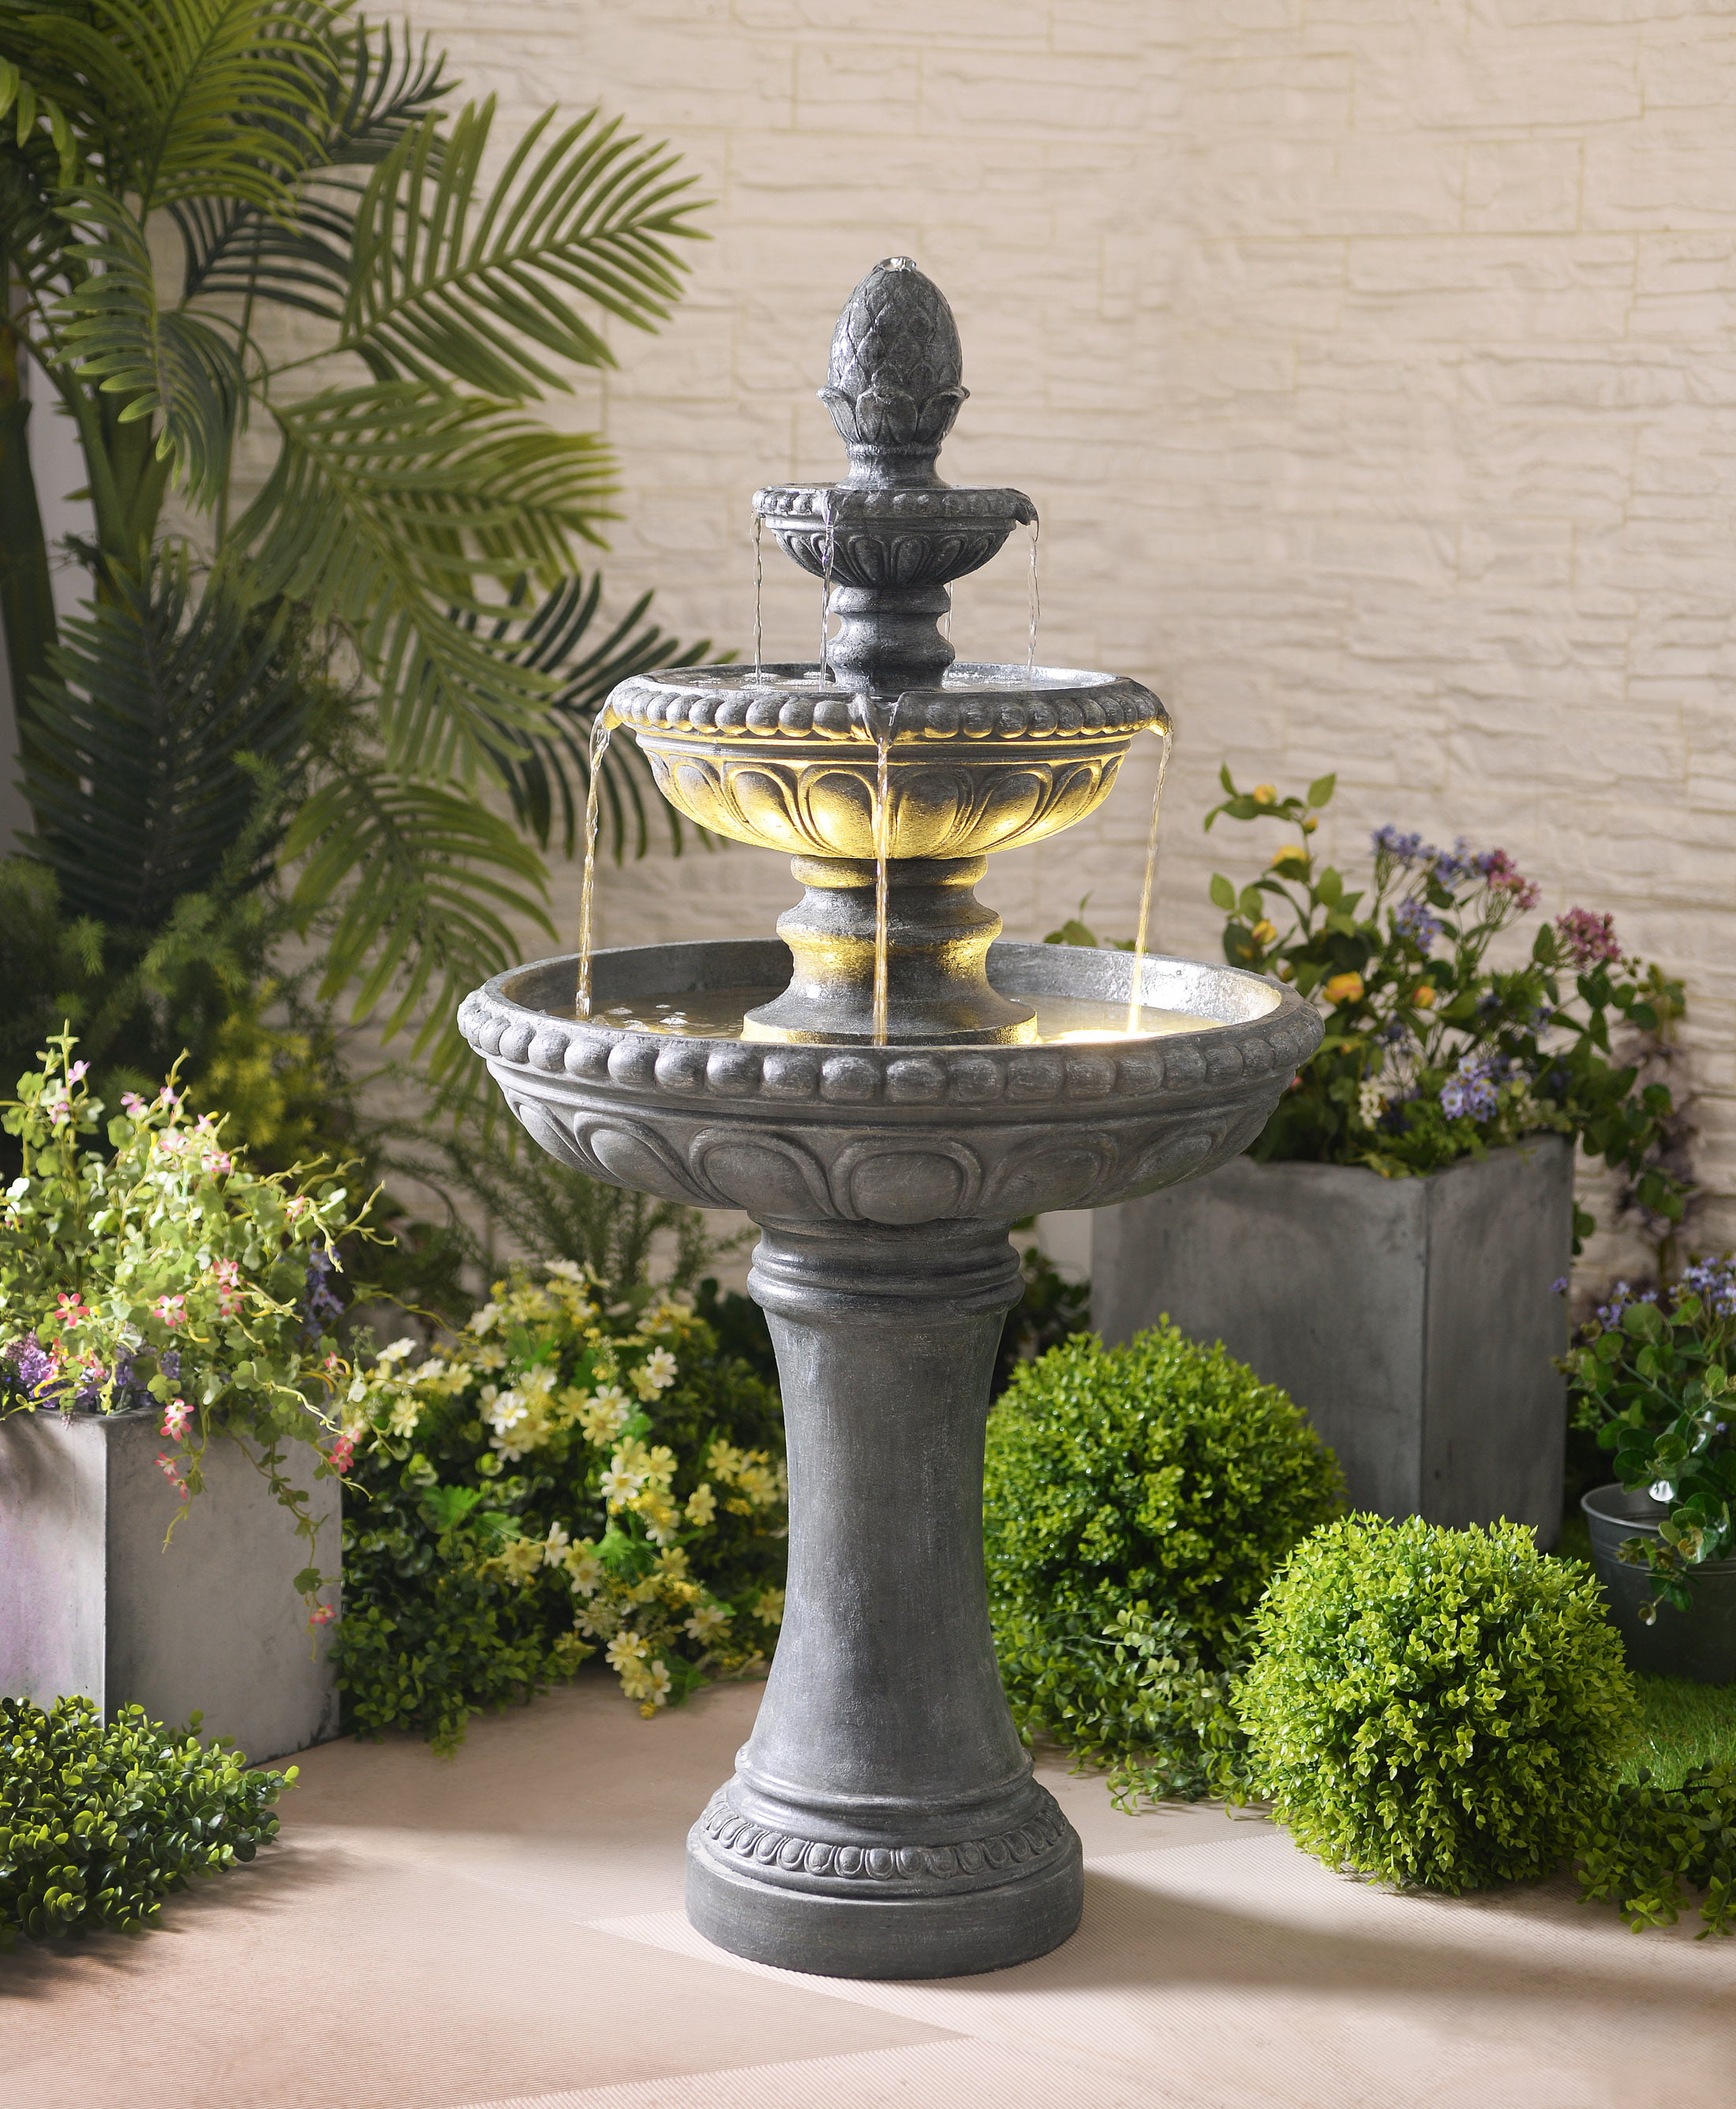 Where To Buy Outdoor Water Fountains - Outdoor Fountains